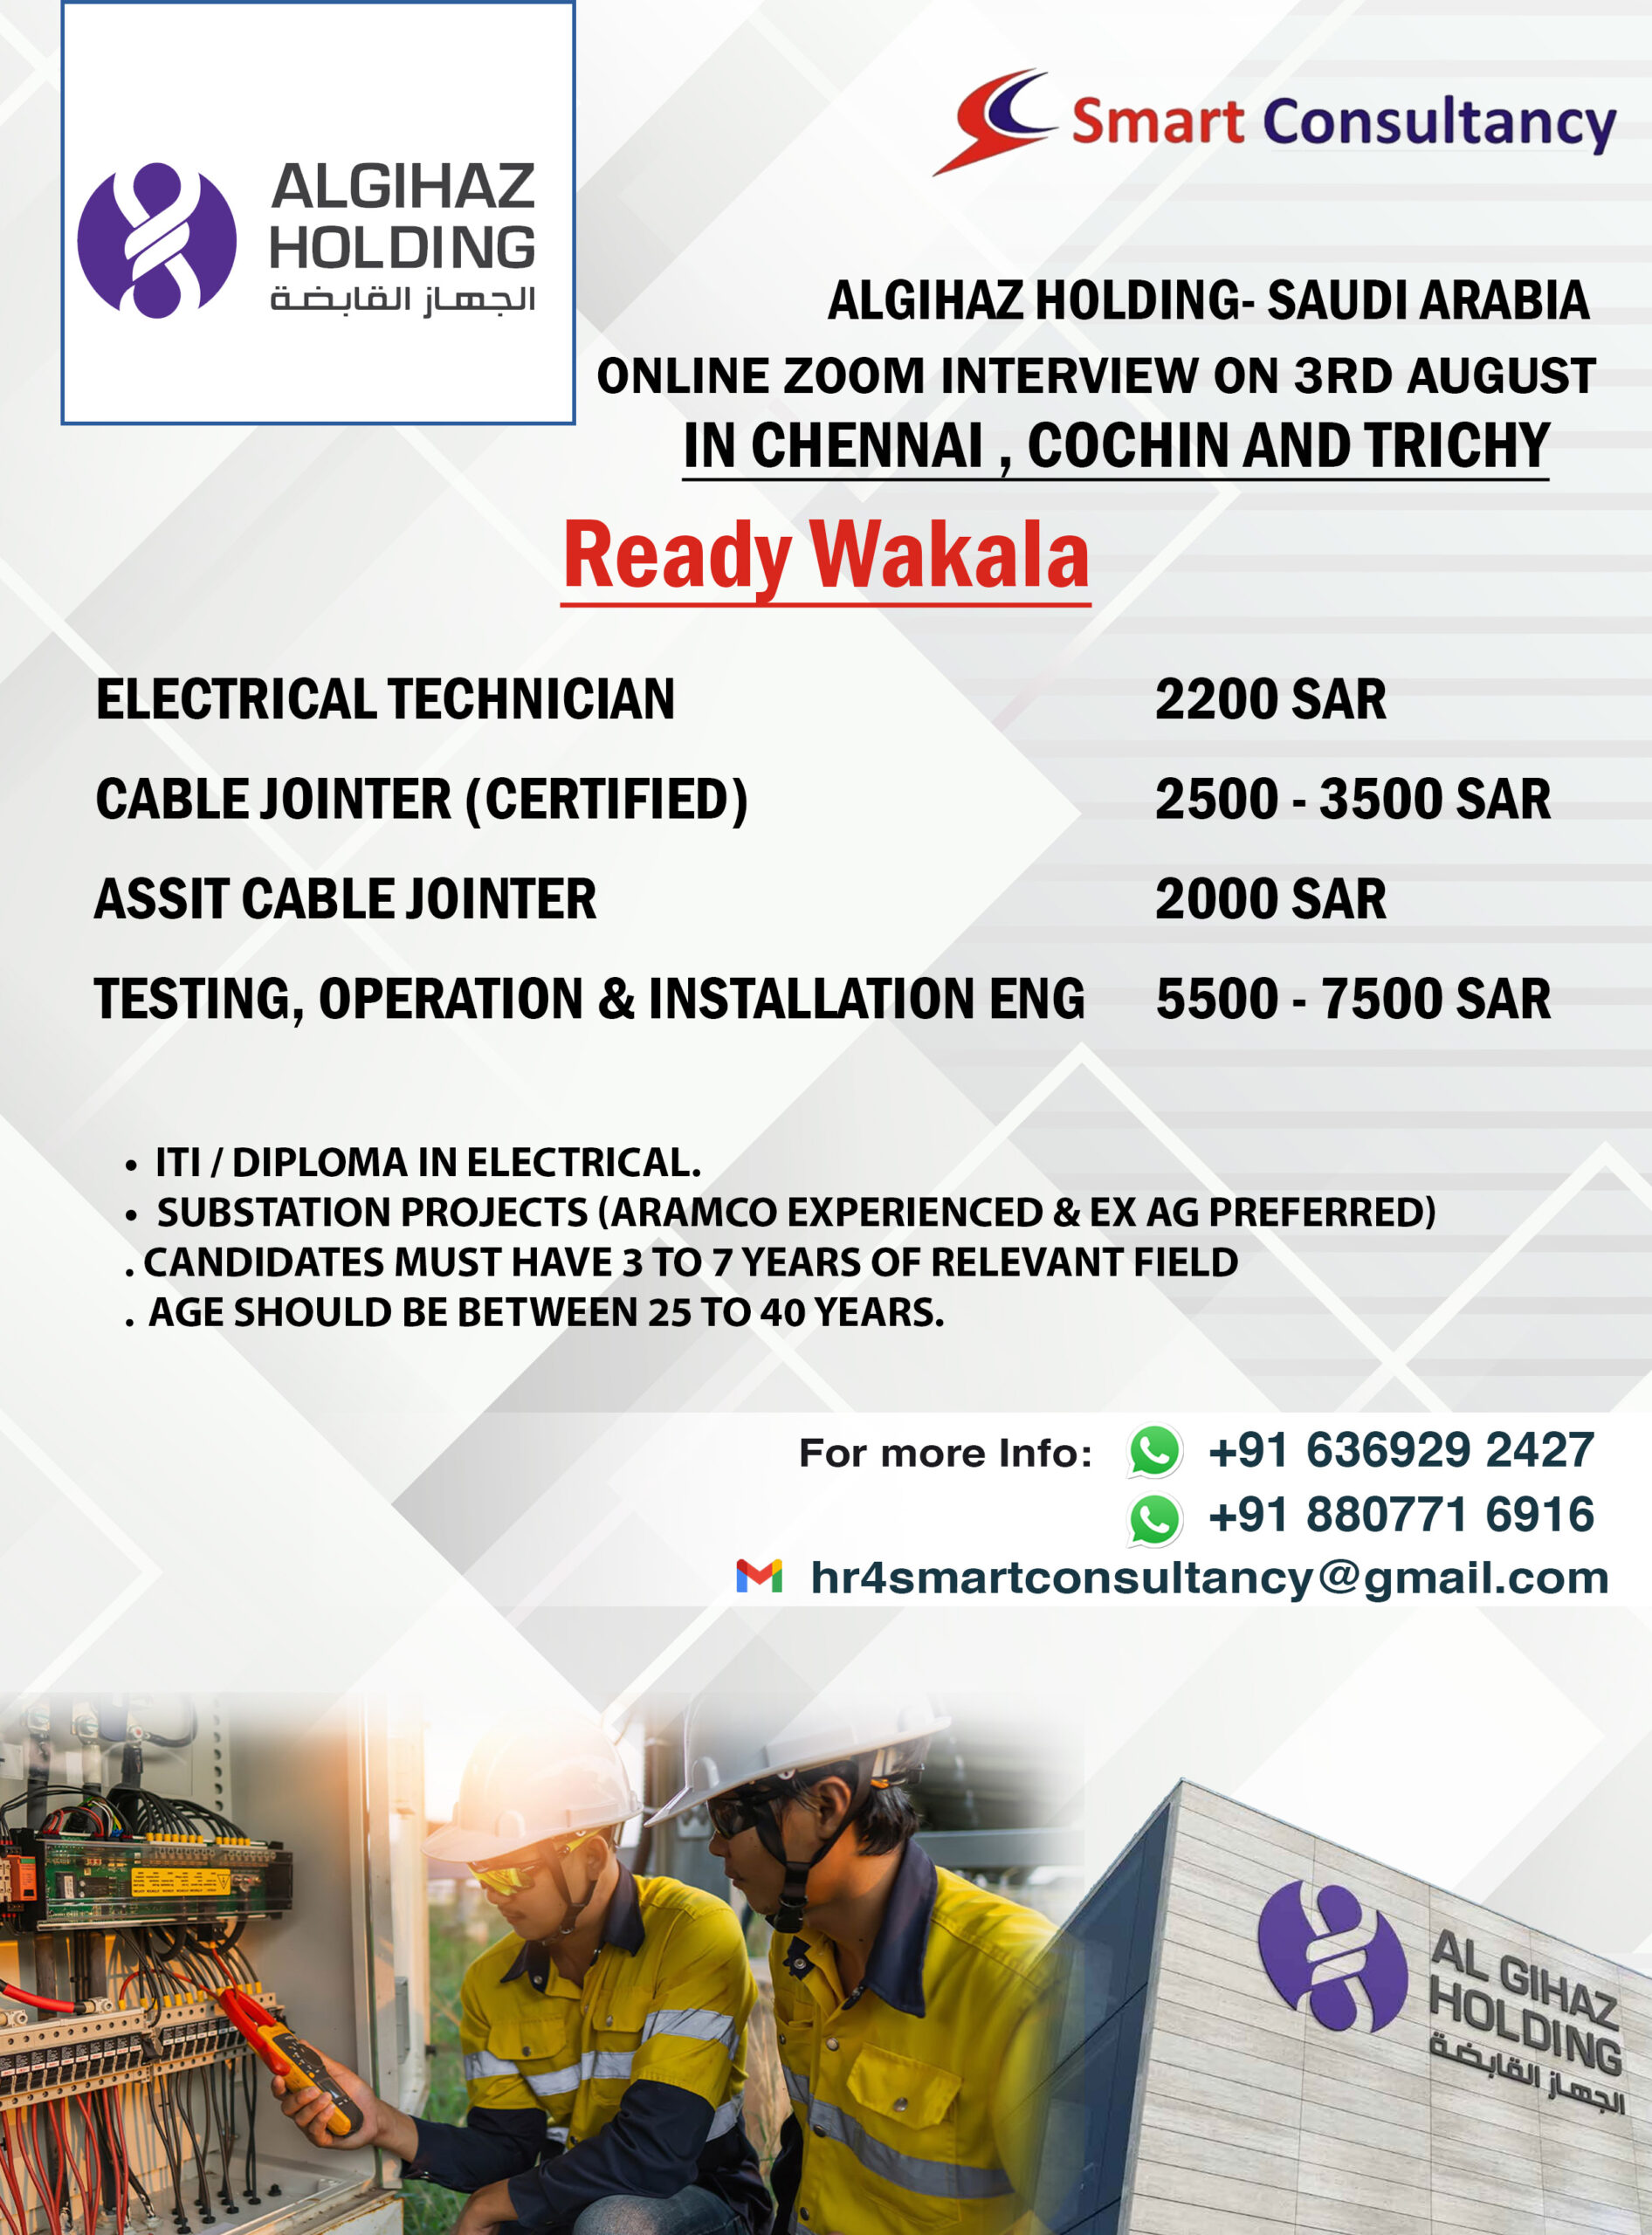 ALGIHAZ HOLDING- SAUDI ARABIA ONLINE INTERVIEW ON 3RD AUG AT CHENNAI , TRICHY AND COCHIN